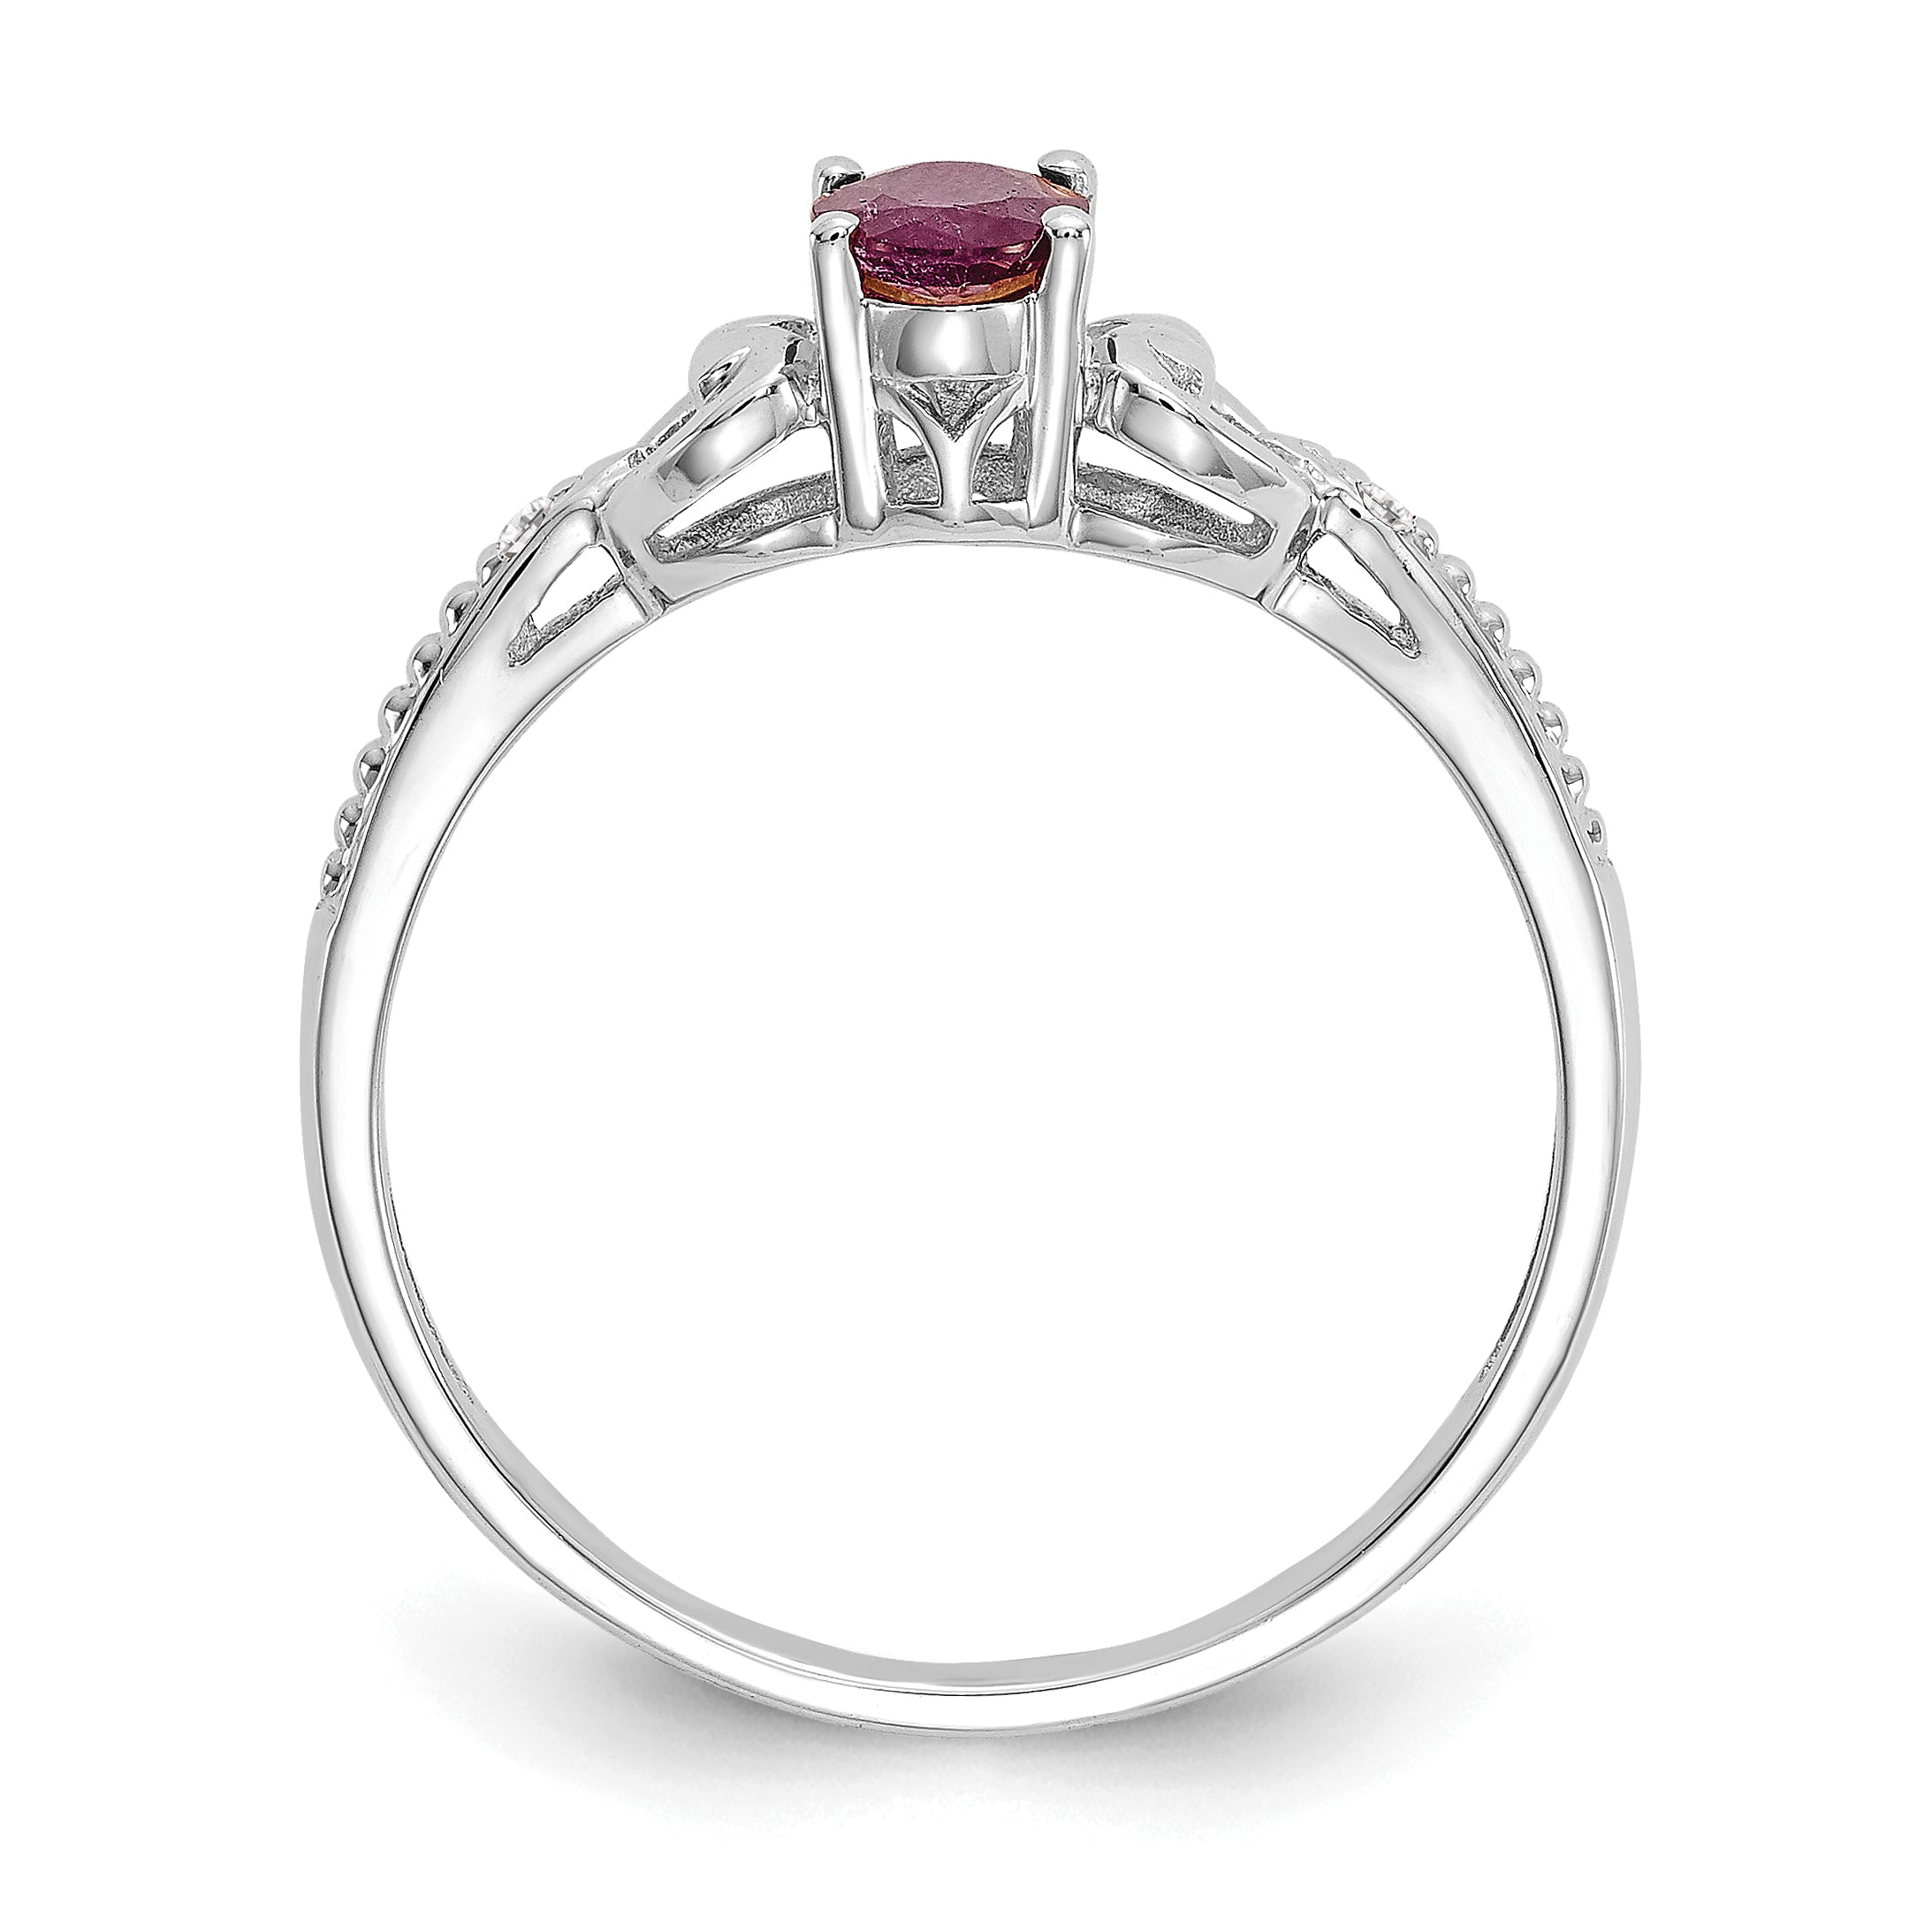 10k White Gold Ruby and Diamond Ring